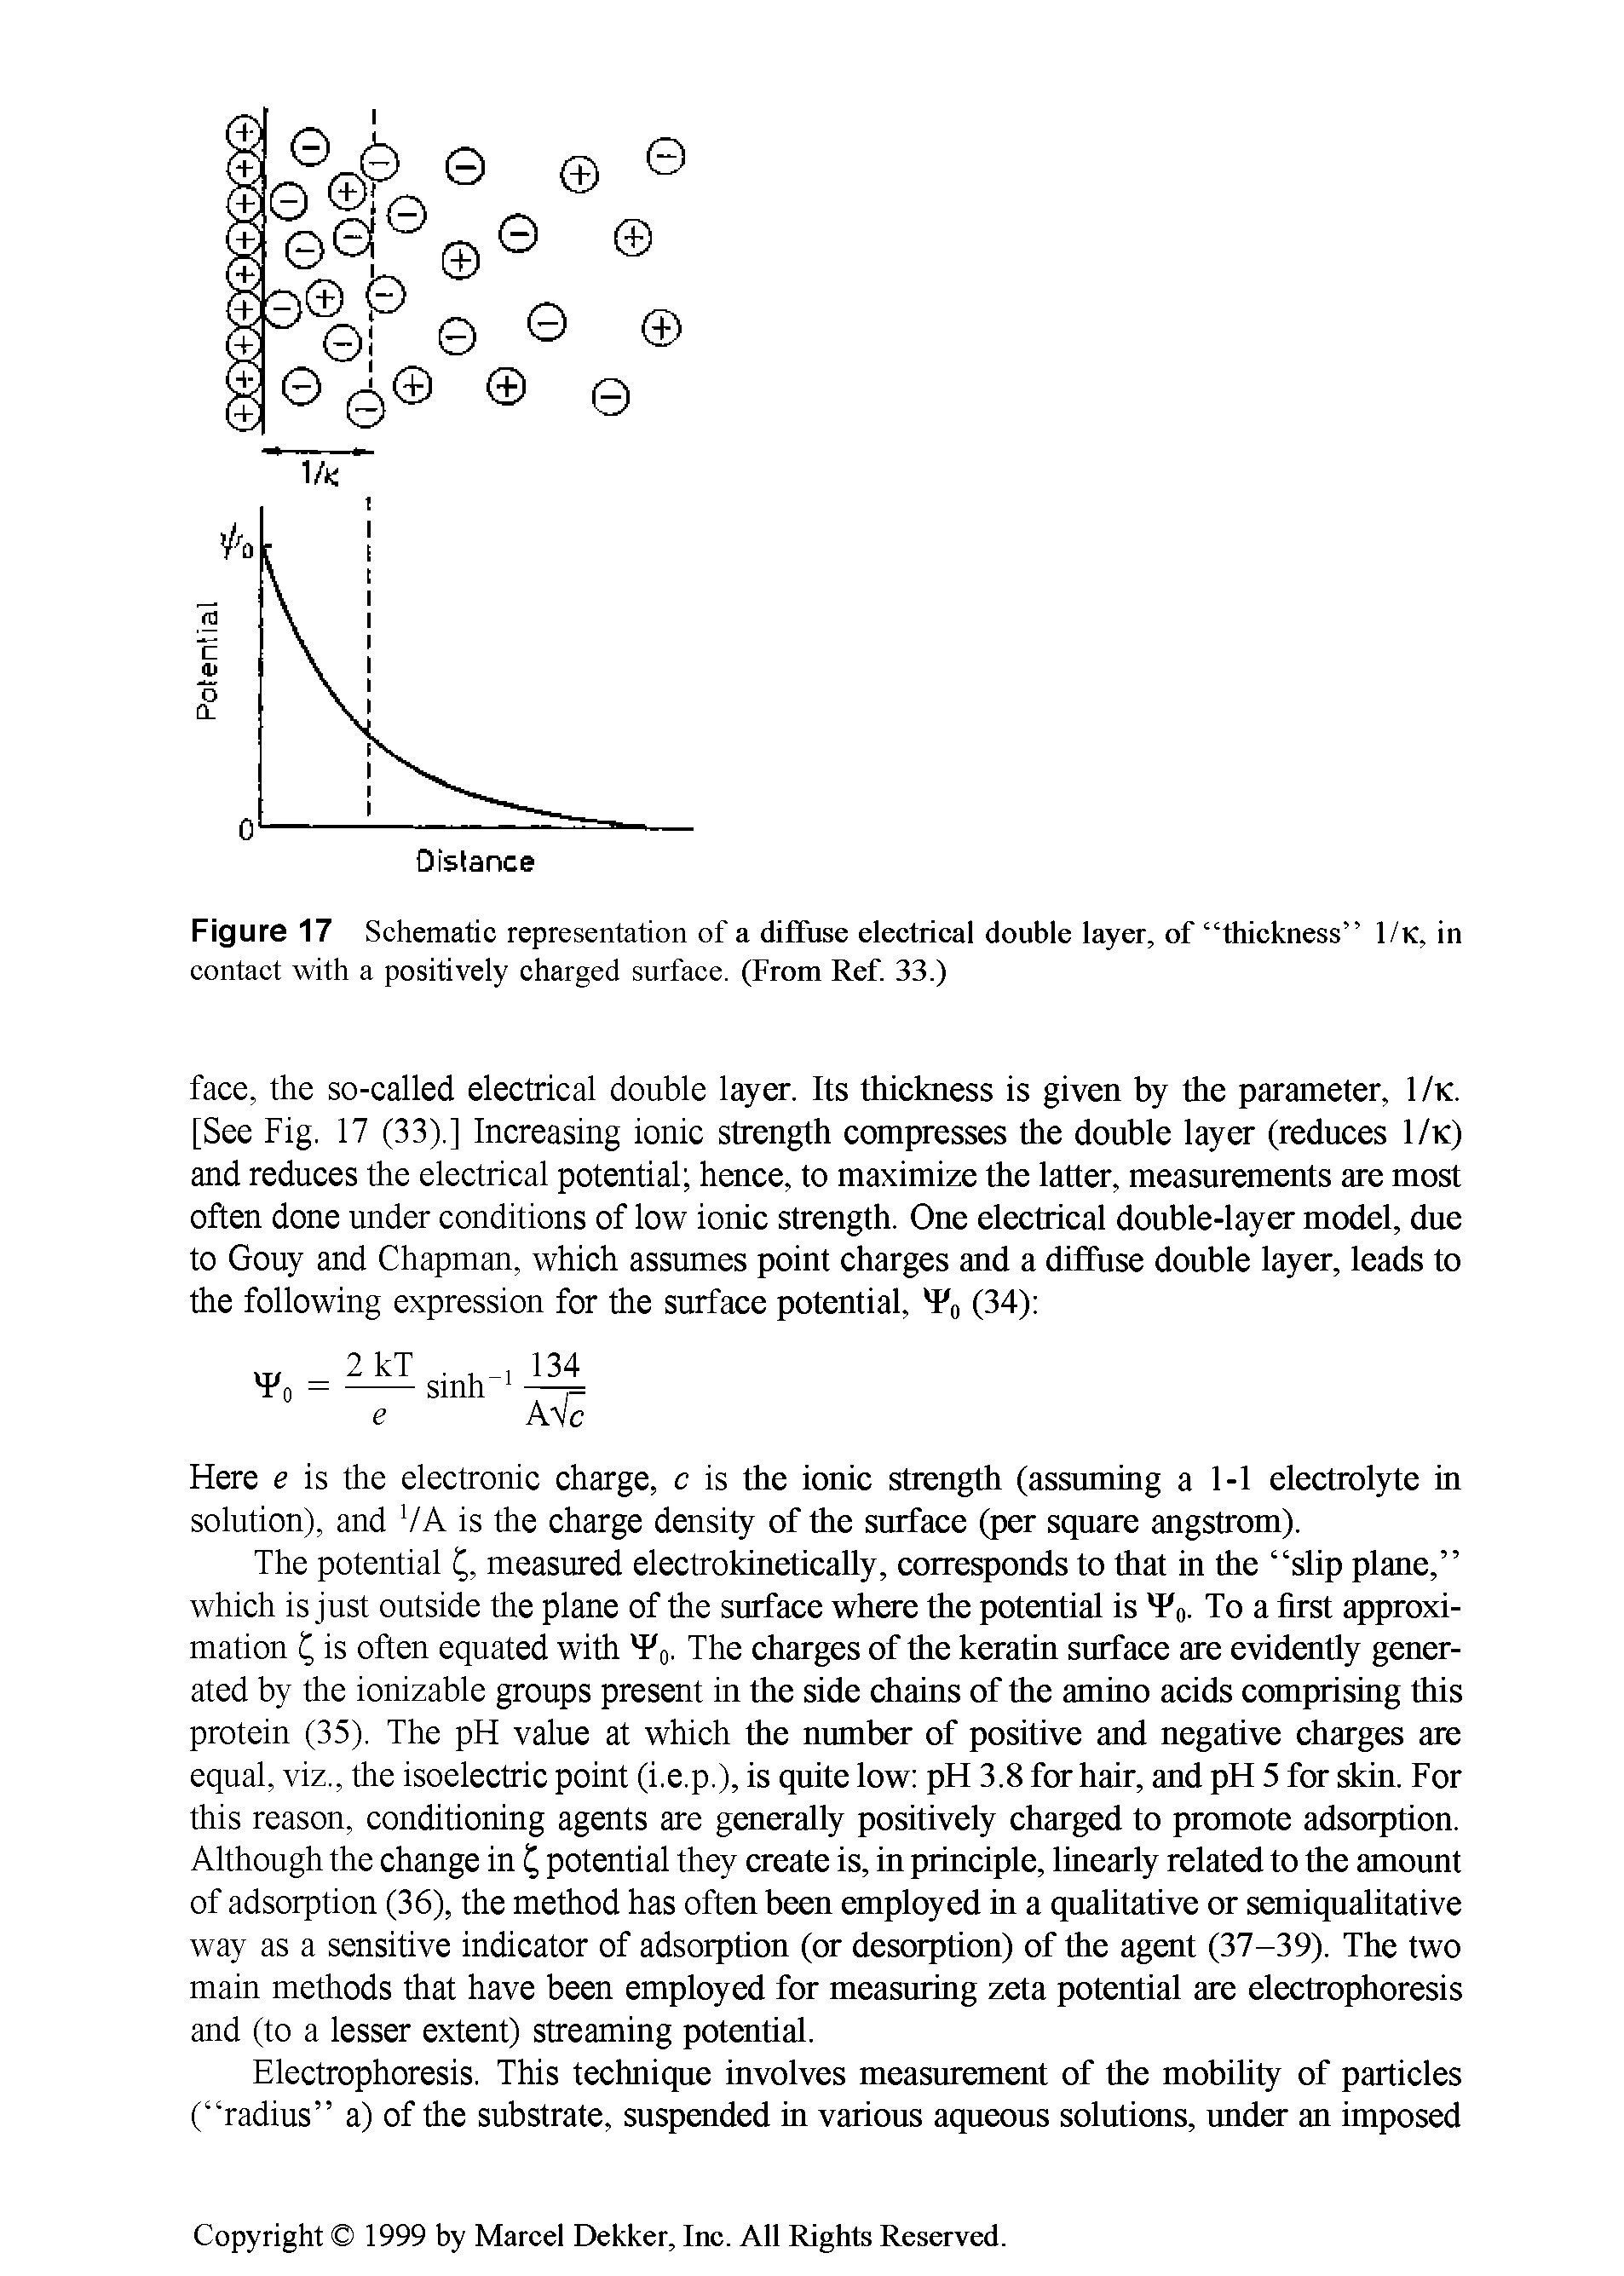 Figure 17 Schematic representation of a diffuse electrical double layer, of thickness 1/K, in contact with a positively charged surface. (From Ref. 33.)...